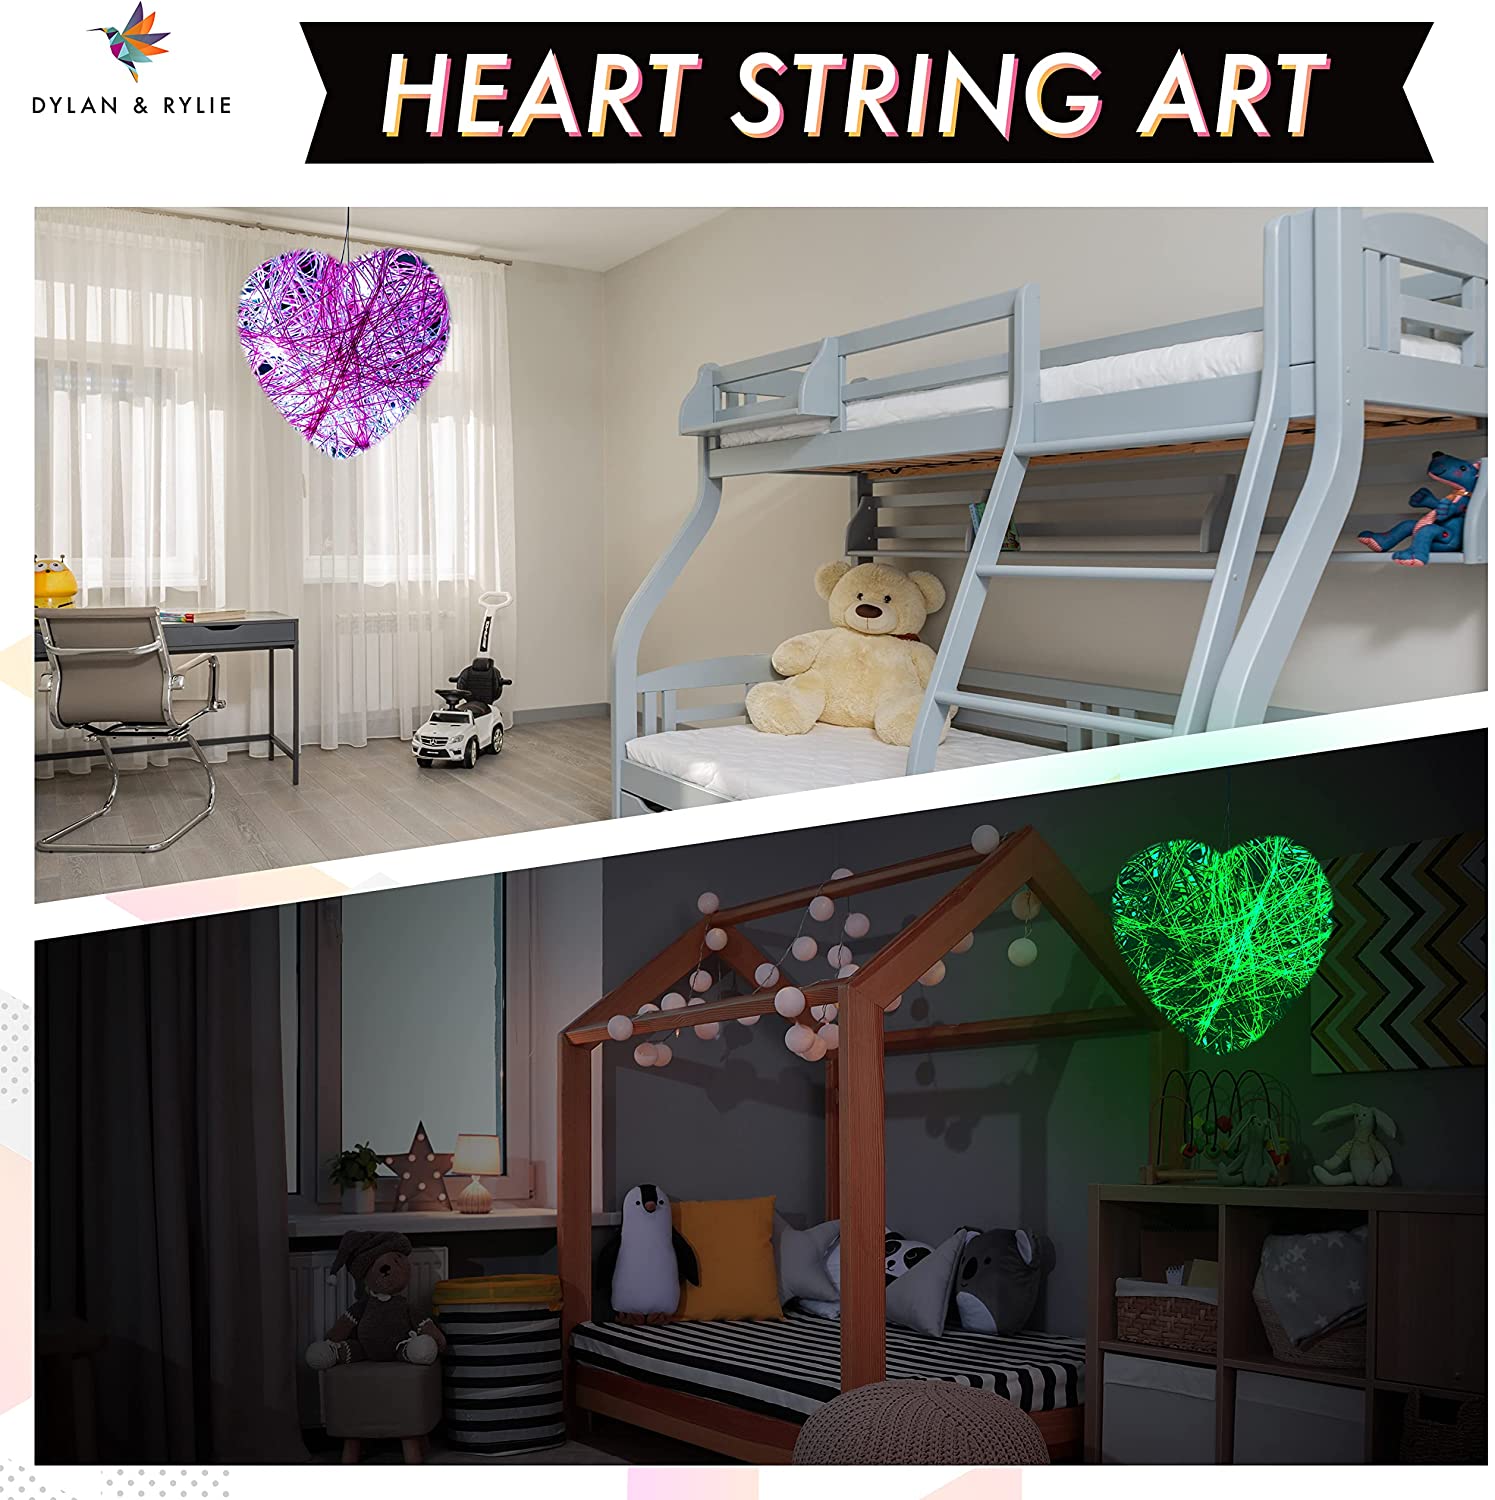 Crafts Art Kit For Kids,3d String Art Kit With Glowing Heart And